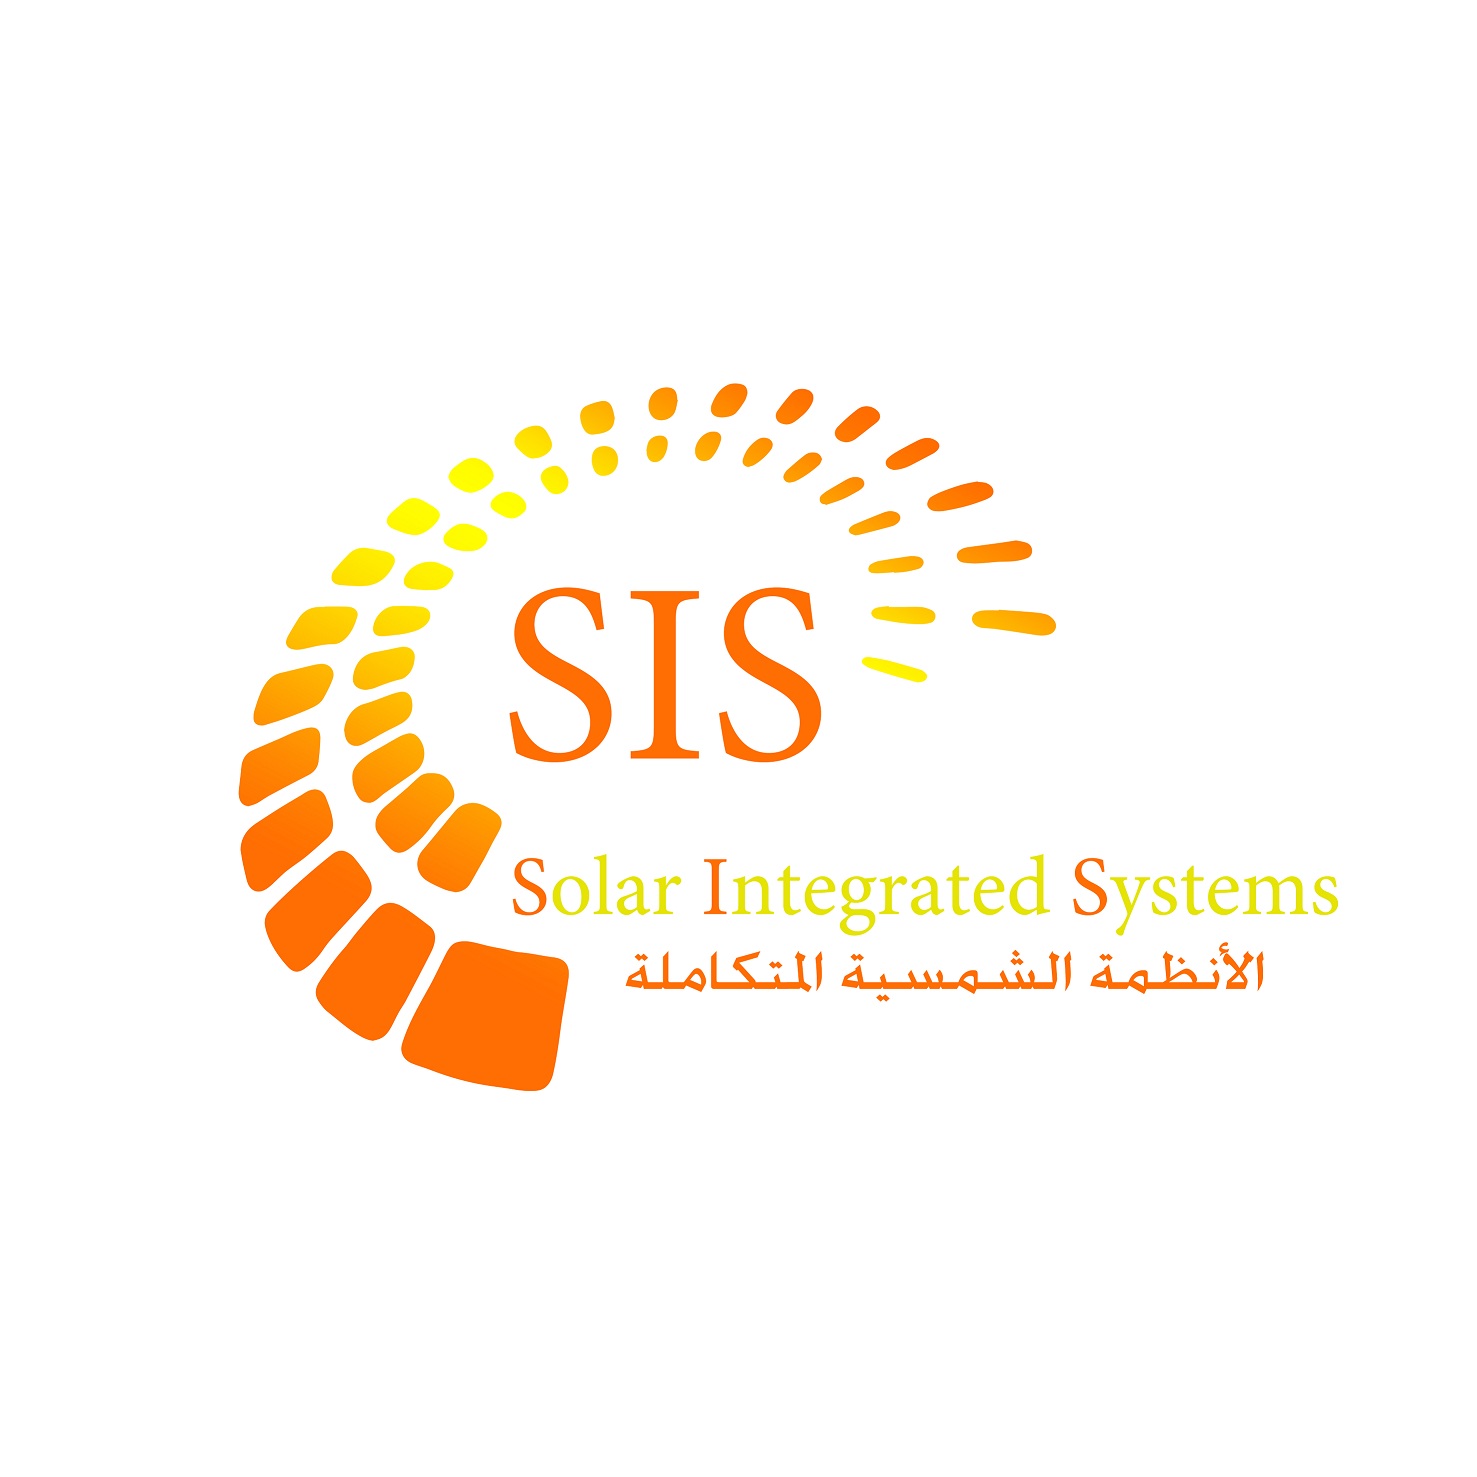 SIS solar integrated systems